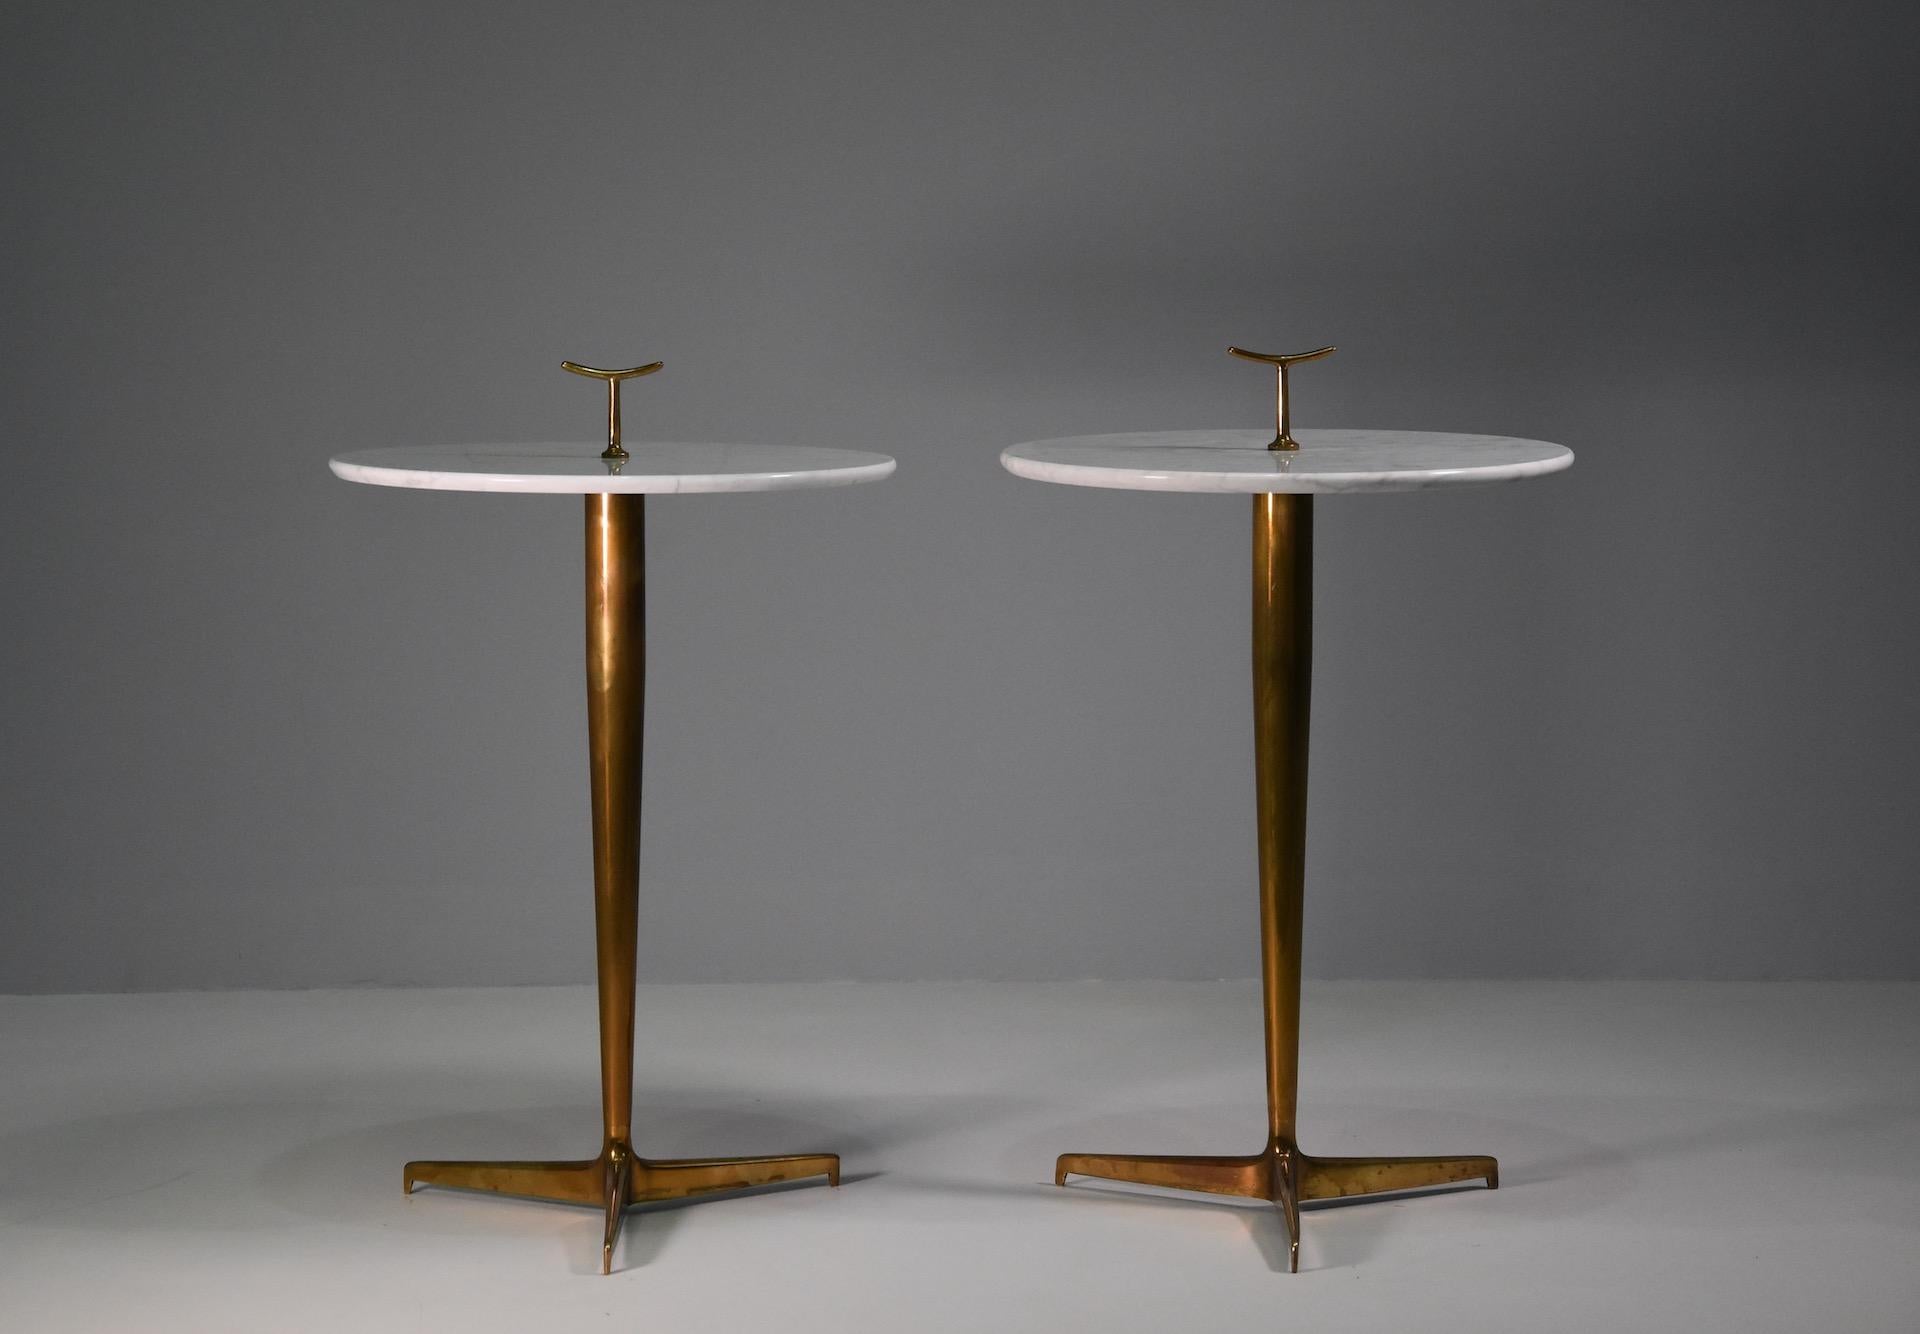 Pair of side coffee table in brass by Osvaldo Borsani, 1960 top in Carrara marble.